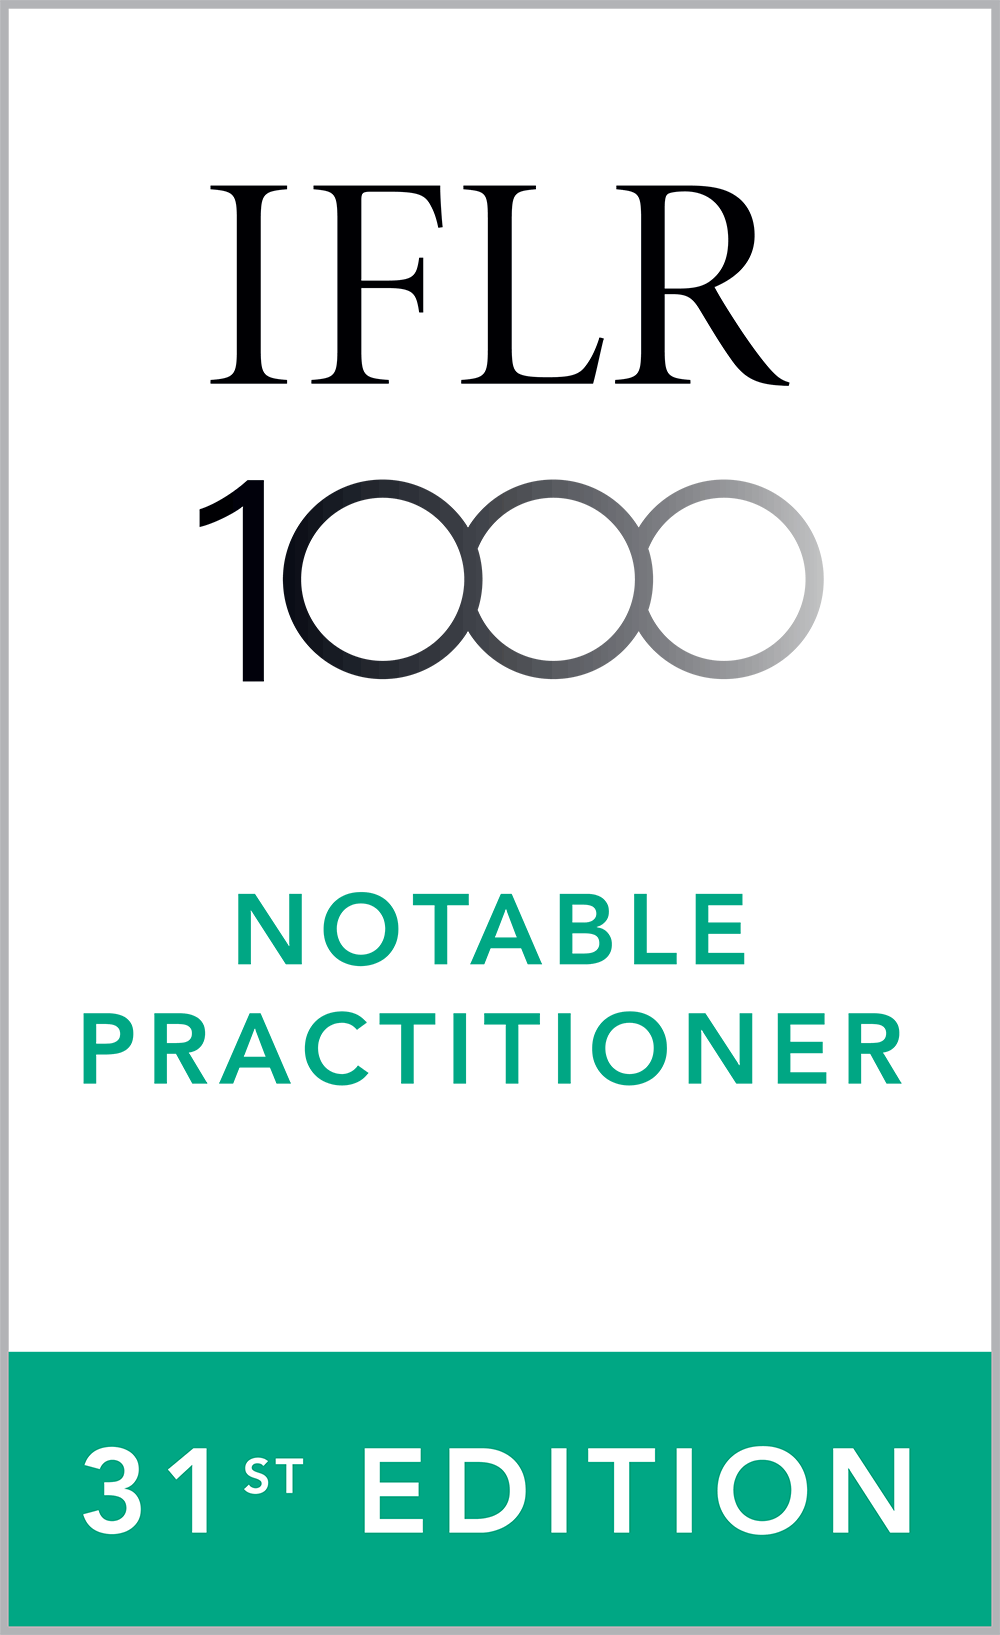 IFLR1000 Notable Practitioner, 31st Edition (2021)